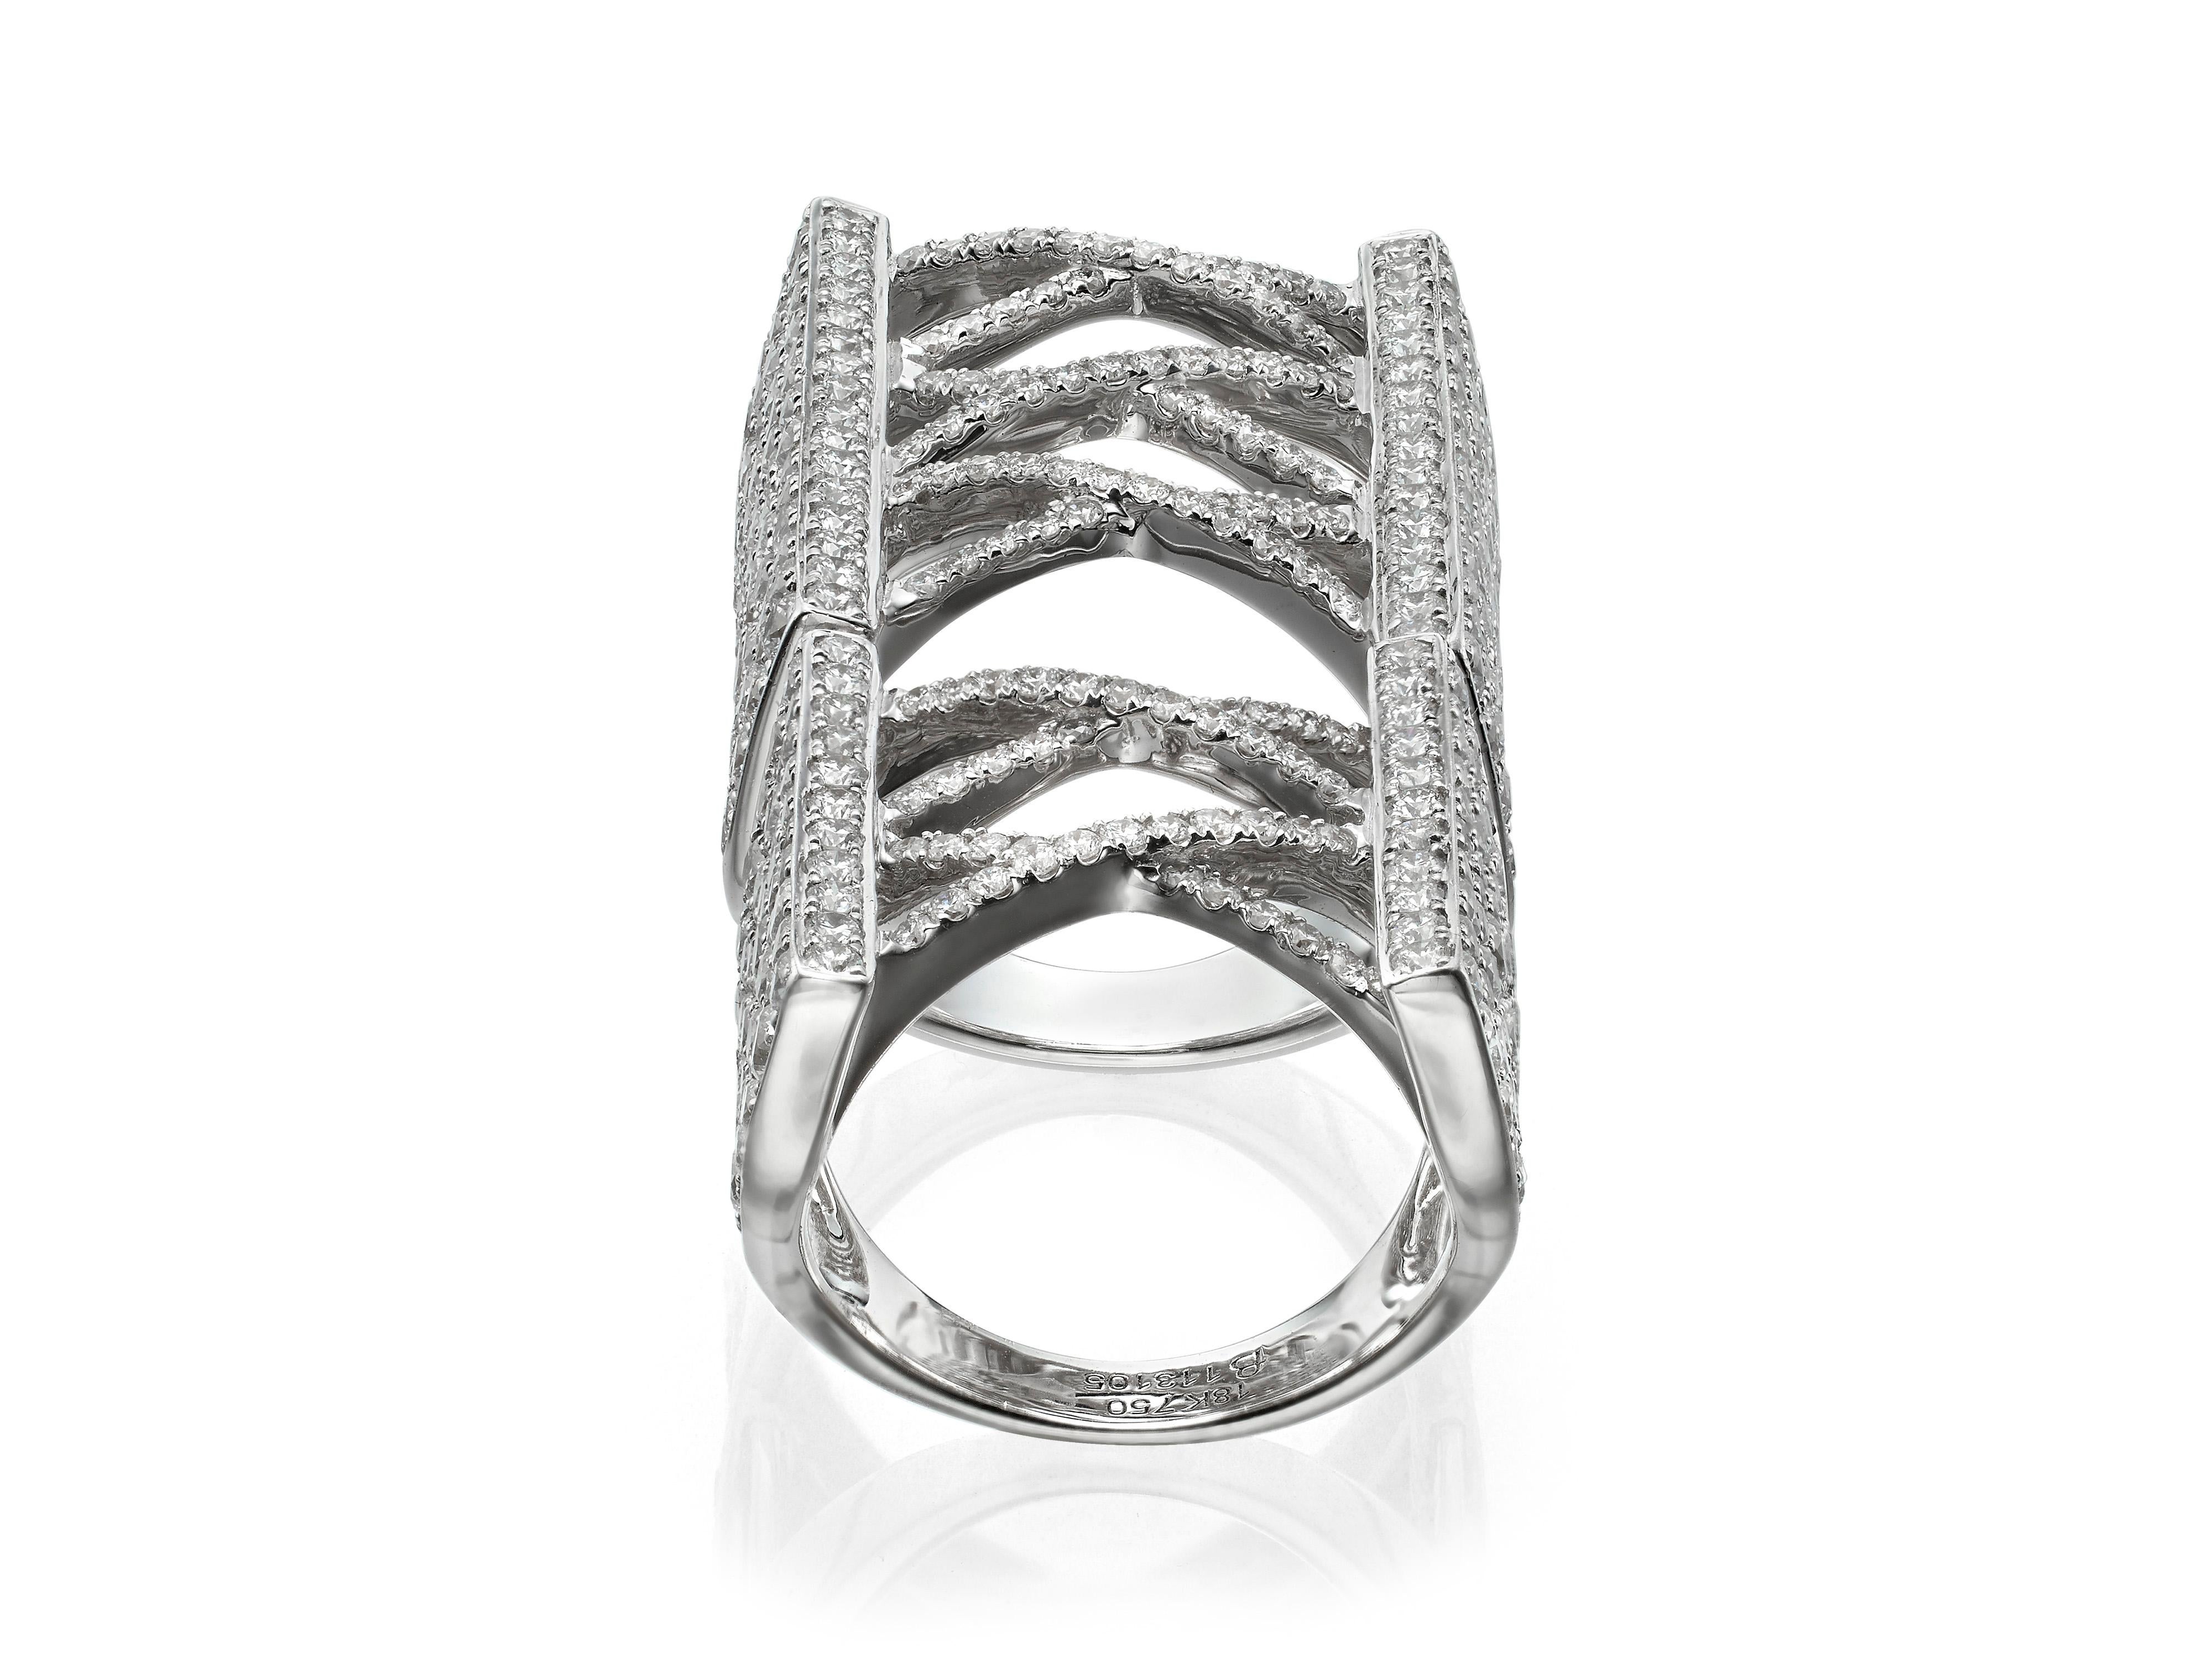 Set with 440 round brilliant cut diamonds totaling 6.72 carats, this sensational full finger corset ring features two hinges crafted to fit and move comfortably.  Set in 18K white gold.  
Currently a ring size US 7.  For other sizes, please contact